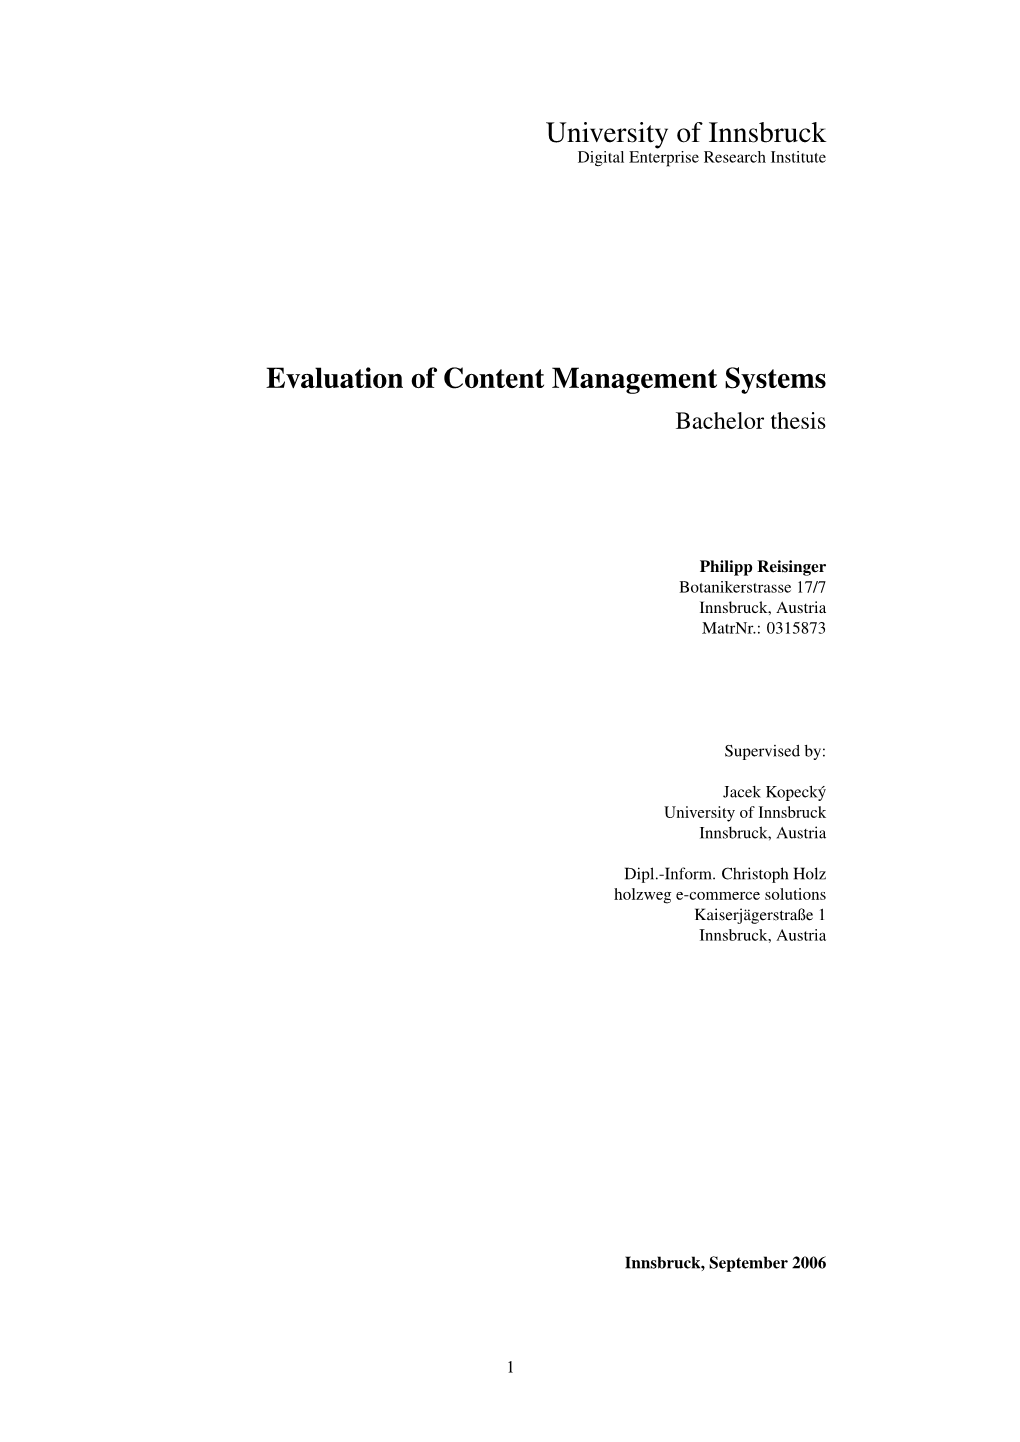 University of Innsbruck Evaluation of Content Management Systems